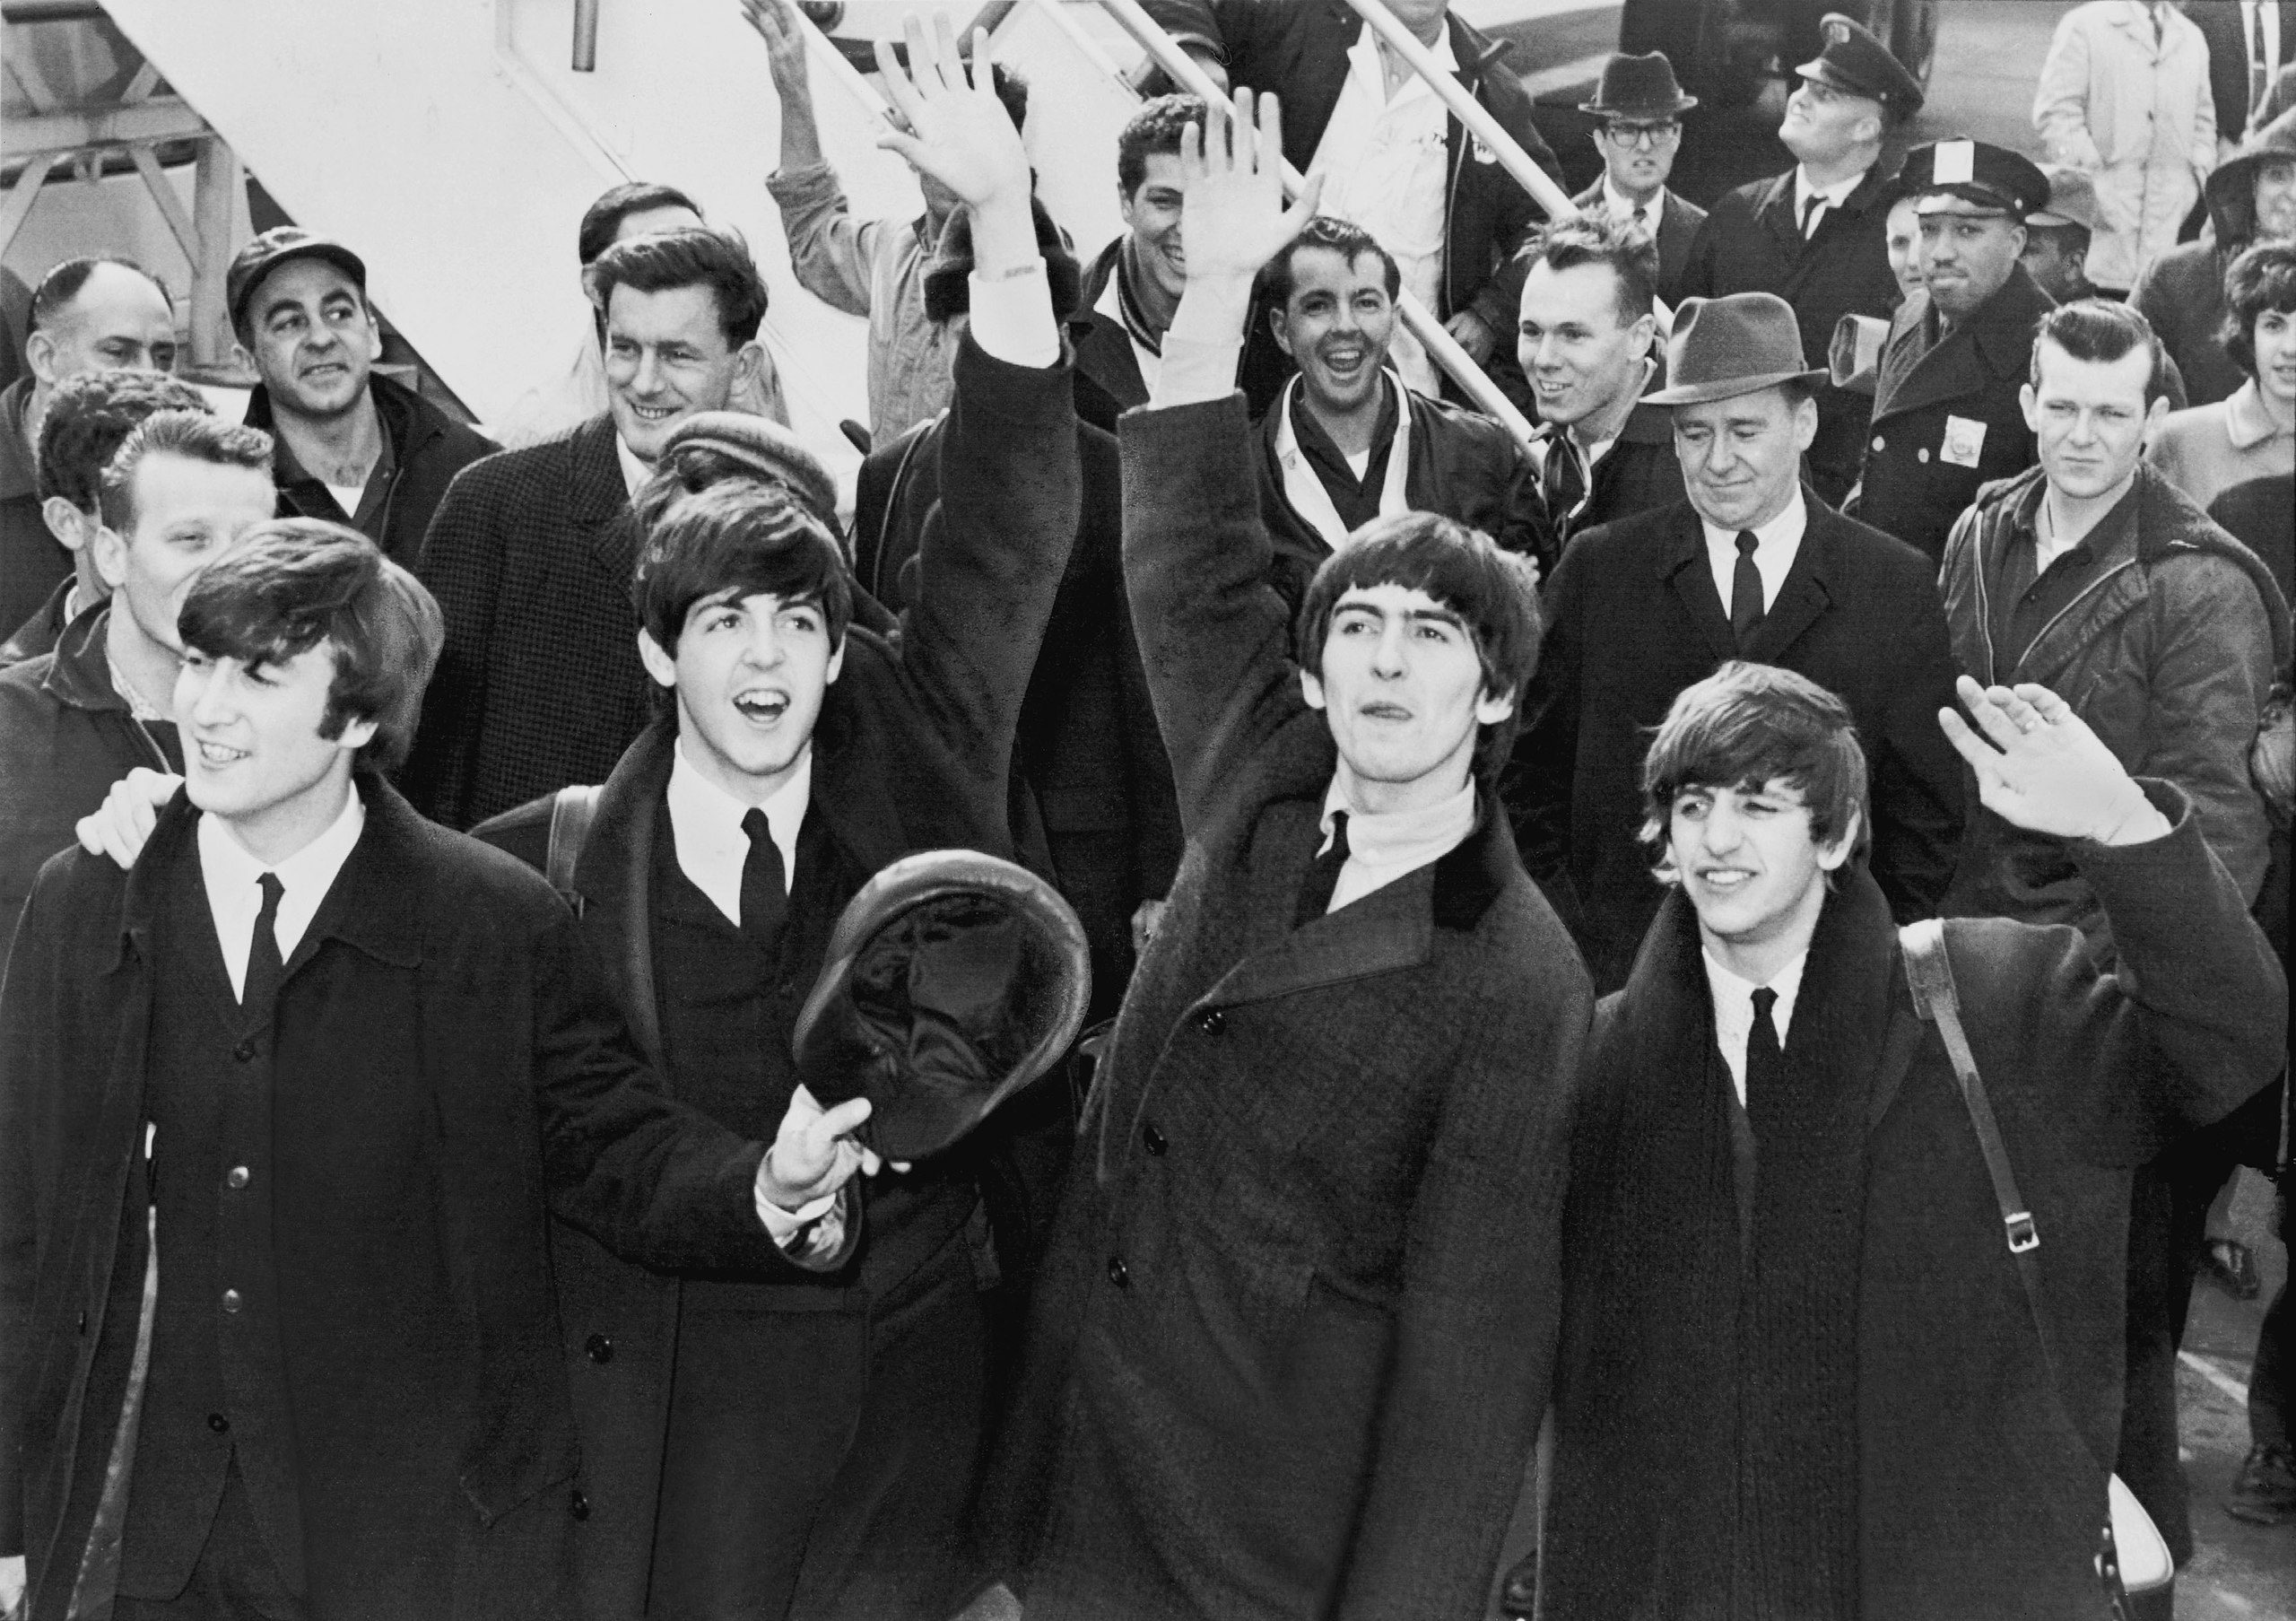 The Beatles Song That Pushed John Lennon’s Voice To The Limit | News | Clash Magazine Music News, Reviews & Interviews